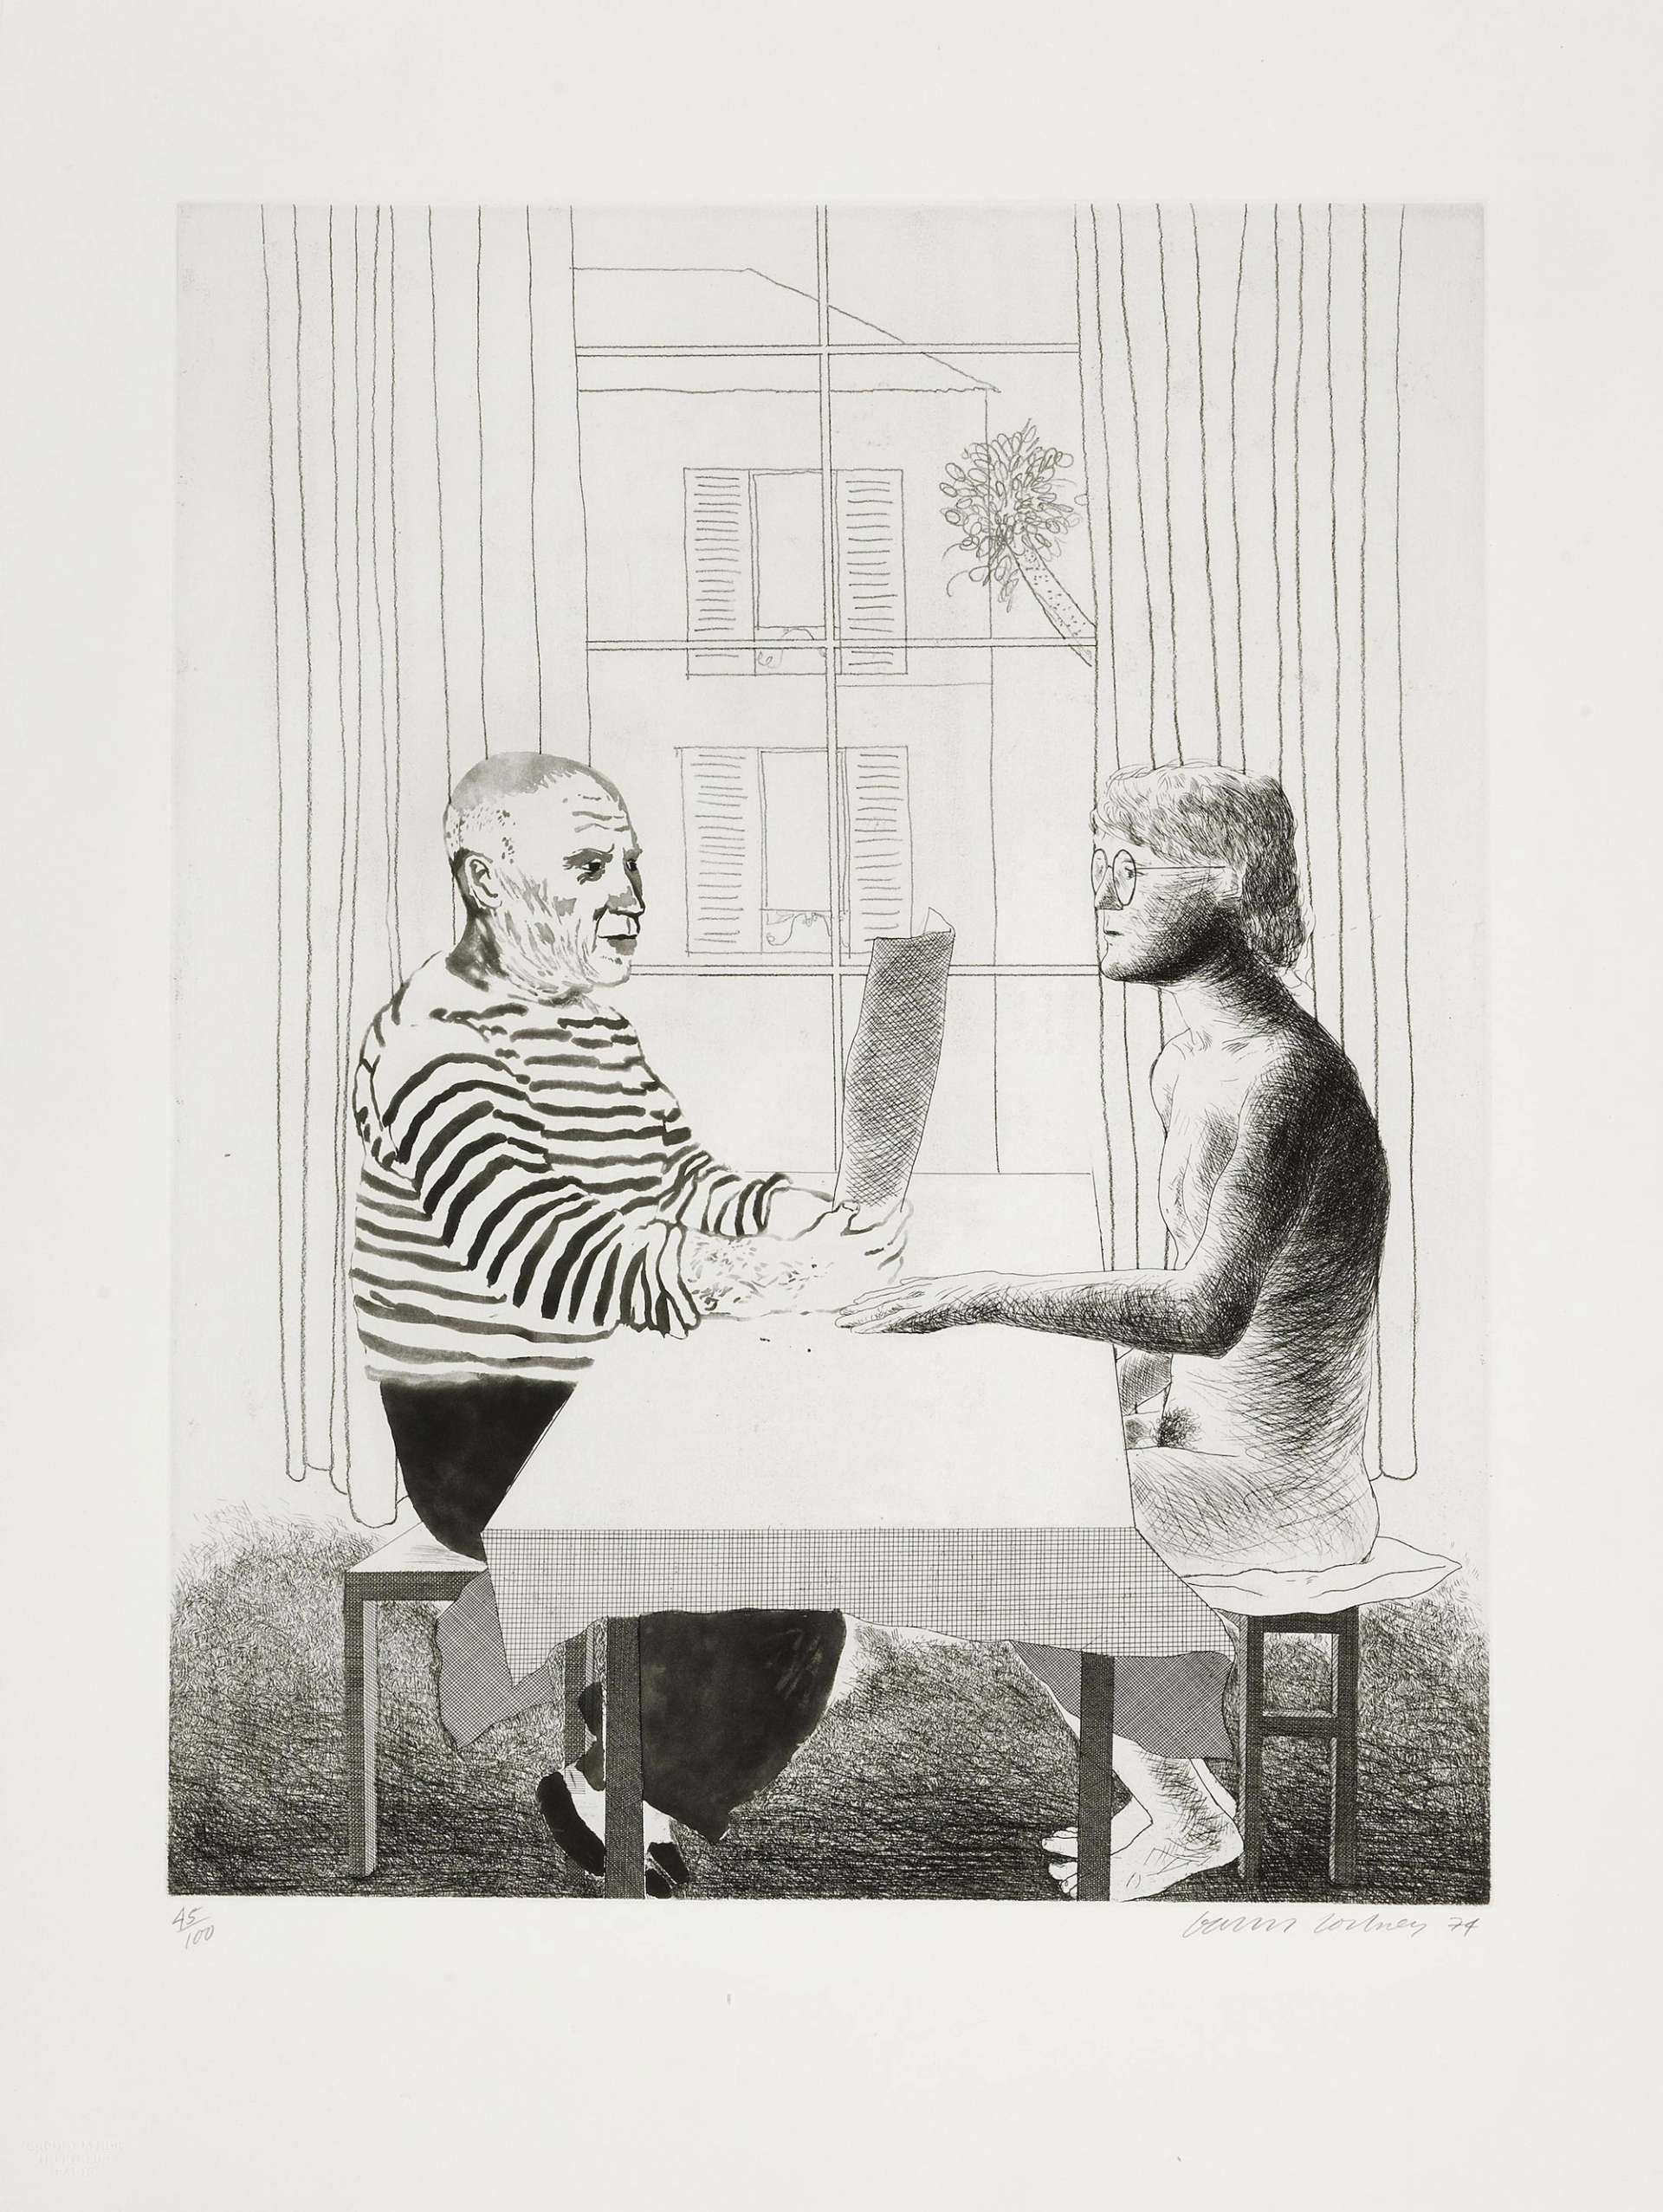 An etching which forms part of the Influences collection, it depicts the artist himself sat face-to-face with one of his greatest inspirations: Spanish artist Pablo Picasso.